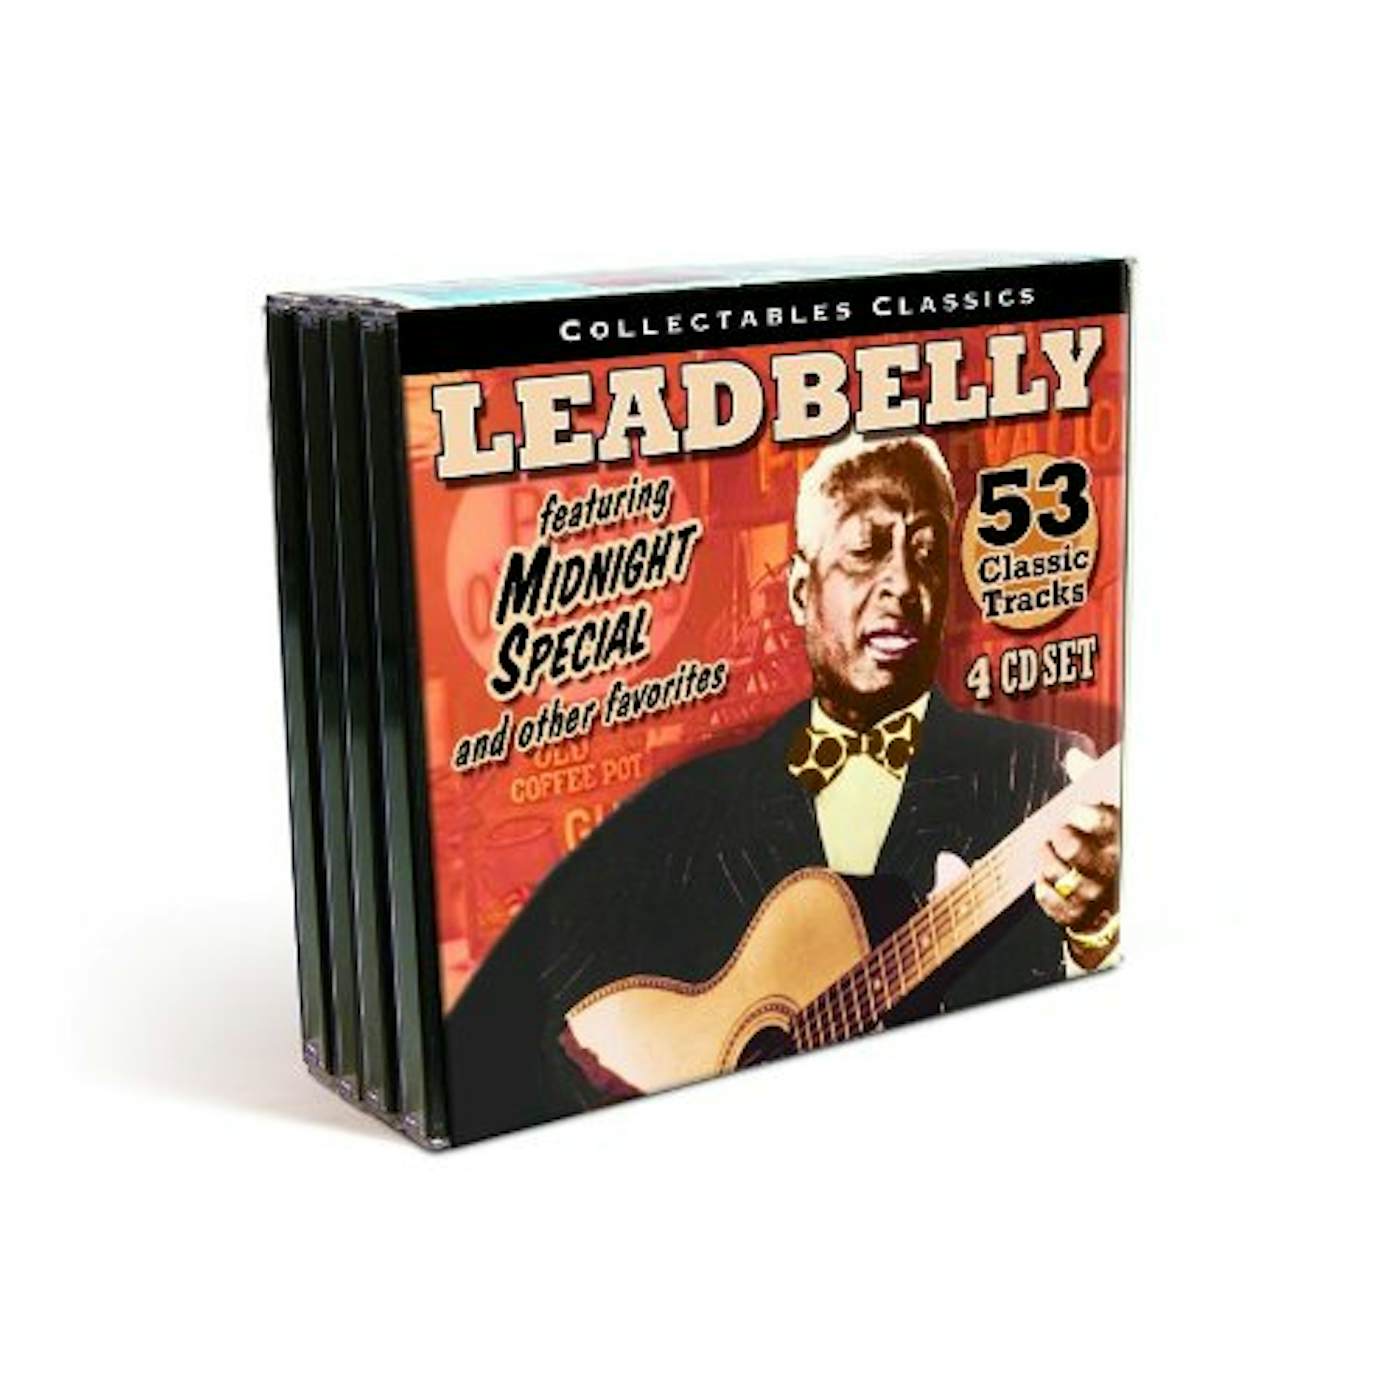 Leadbelly COLLECTABLES CLASSICS CD